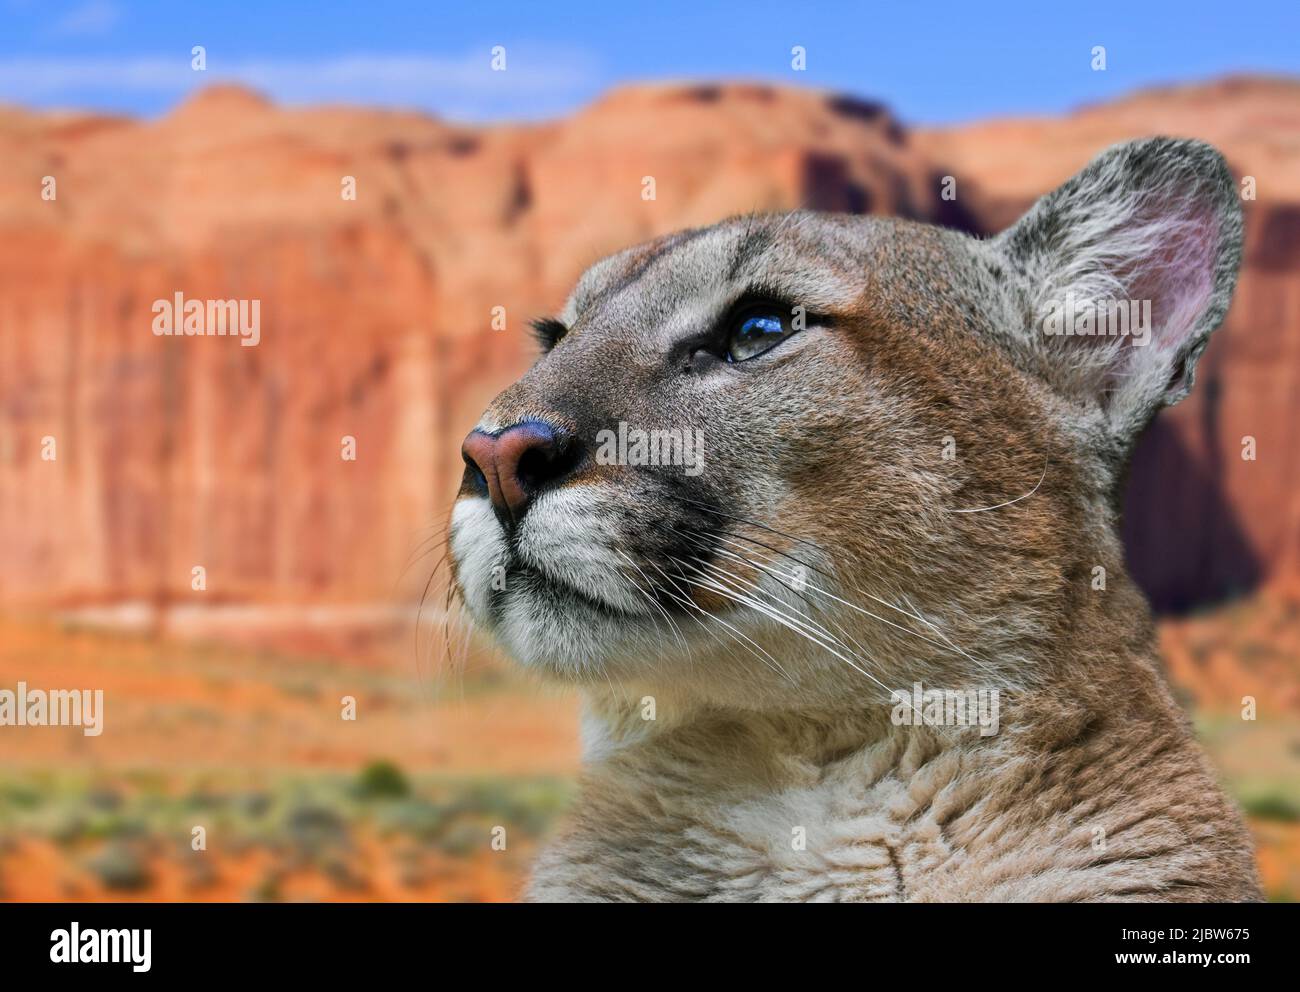 Close up portrait of cougar / puma / mountain lion / panther (Puma concolor) in North American desert mountain landscape, Arizona, USA Stock Photo